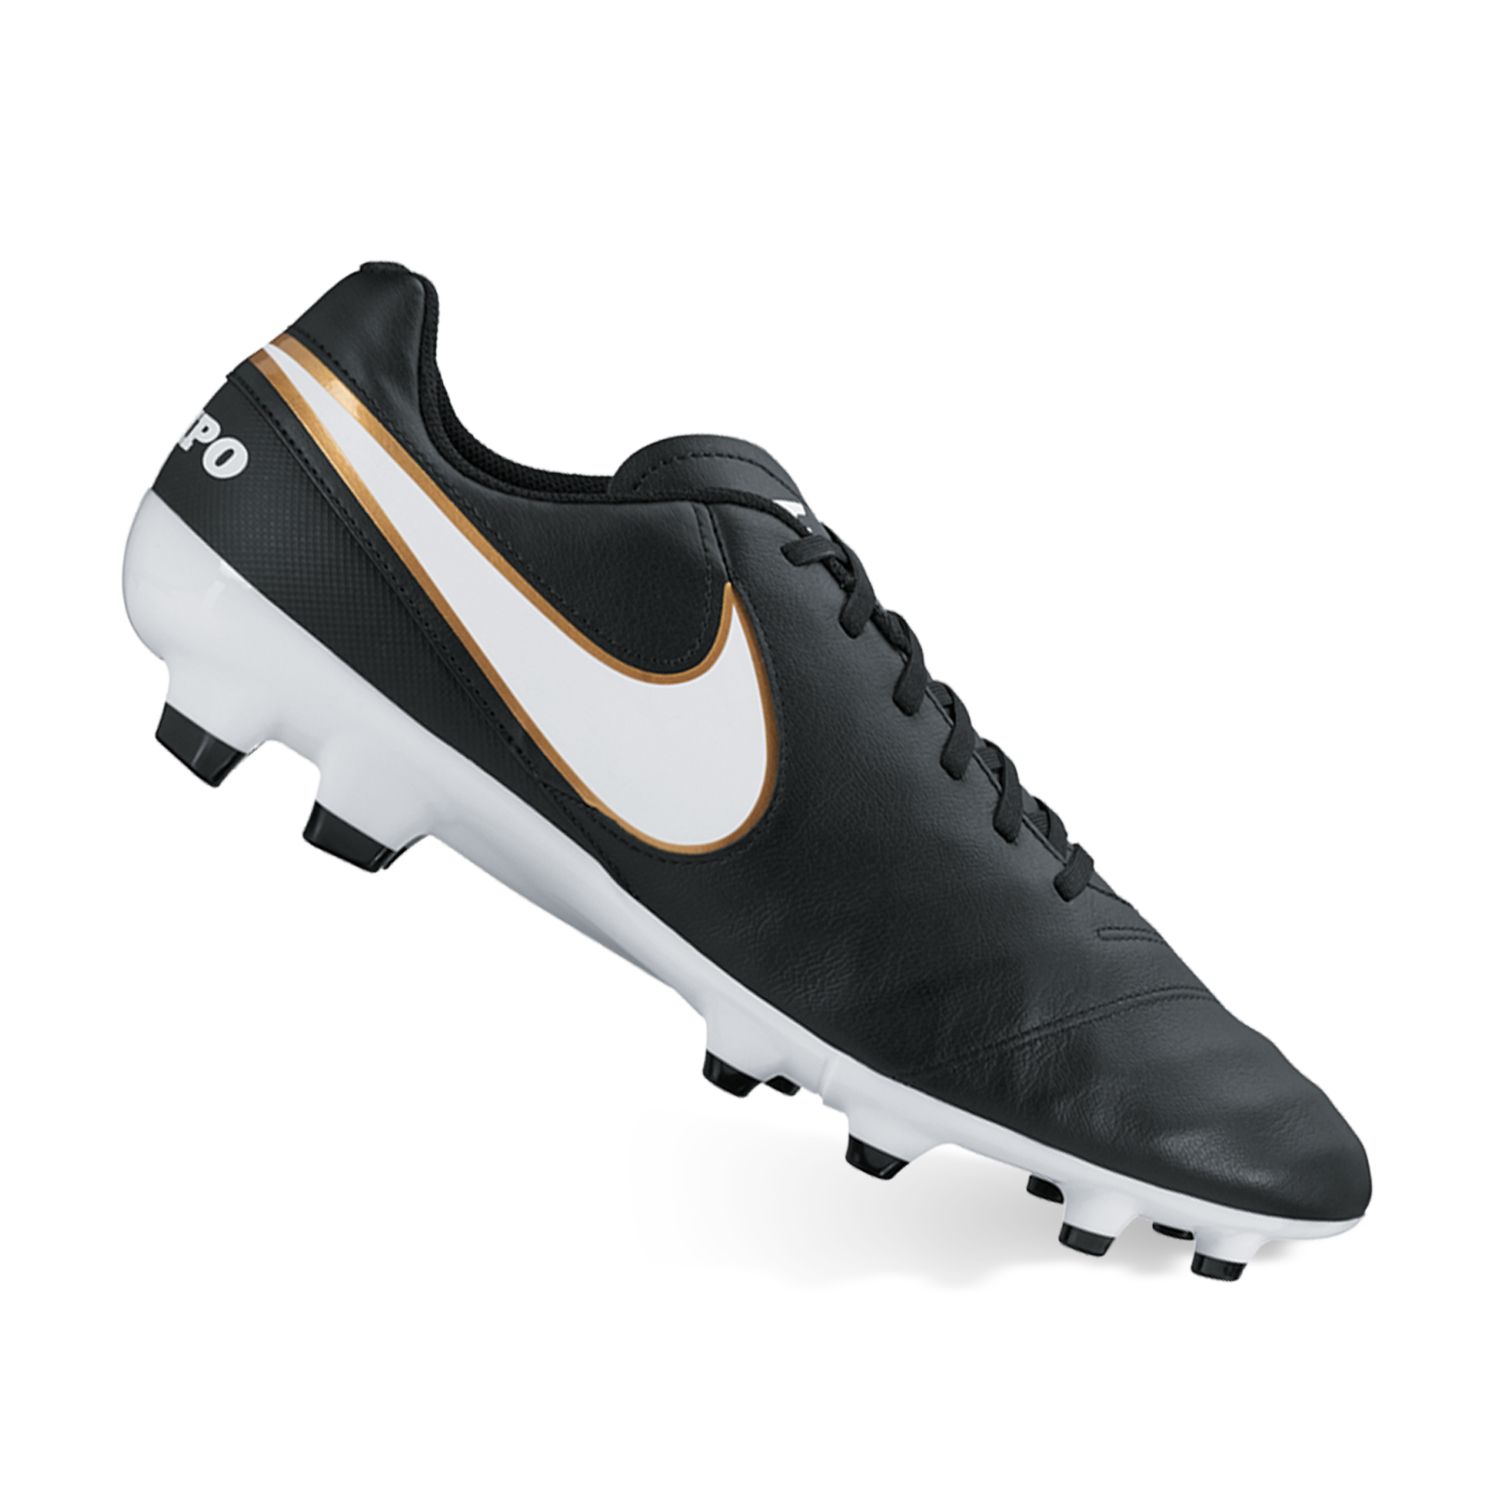 Nike Tiempo Genio Leather II Firm-Ground Men's Soccer Cleats